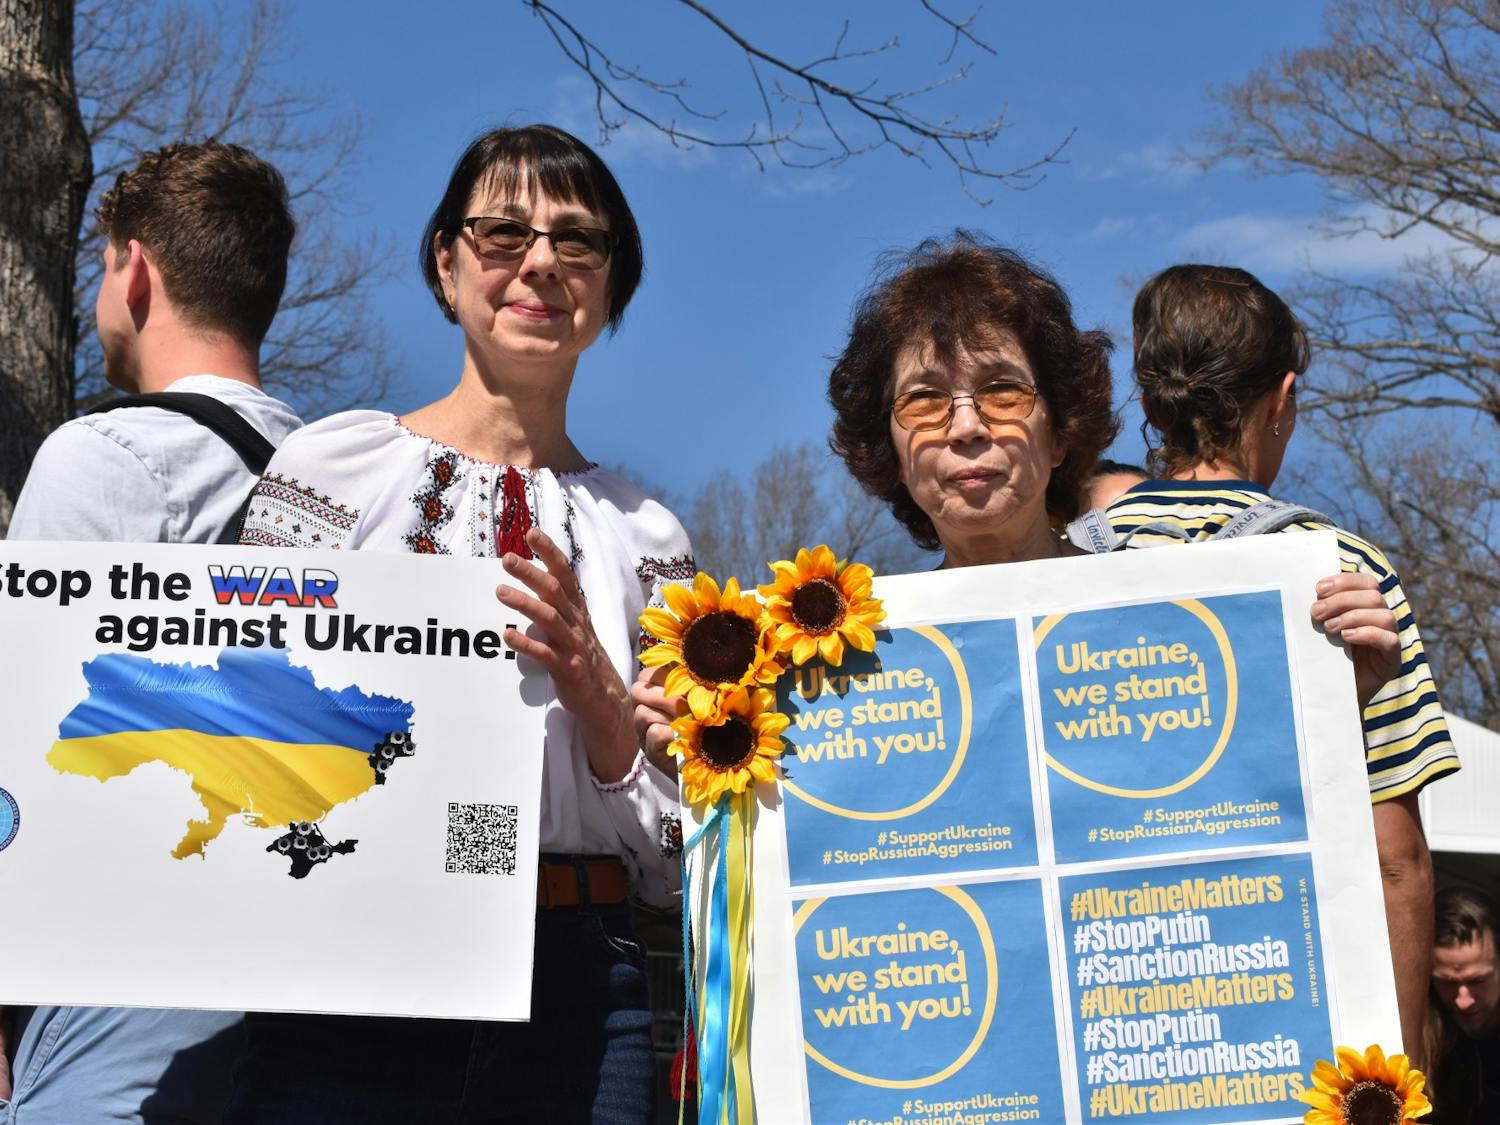 Maryana Kapustina, research associate professor at the UNC School of Medicine, and alumna Donna Goldstein hold up signs in solidarity with Ukraine at a campus rally on Thursday, Mar. 3, 2022. "We hope for a peaceful end to this war. In the meantime, support Ukraine any way you can," Goldstein said.